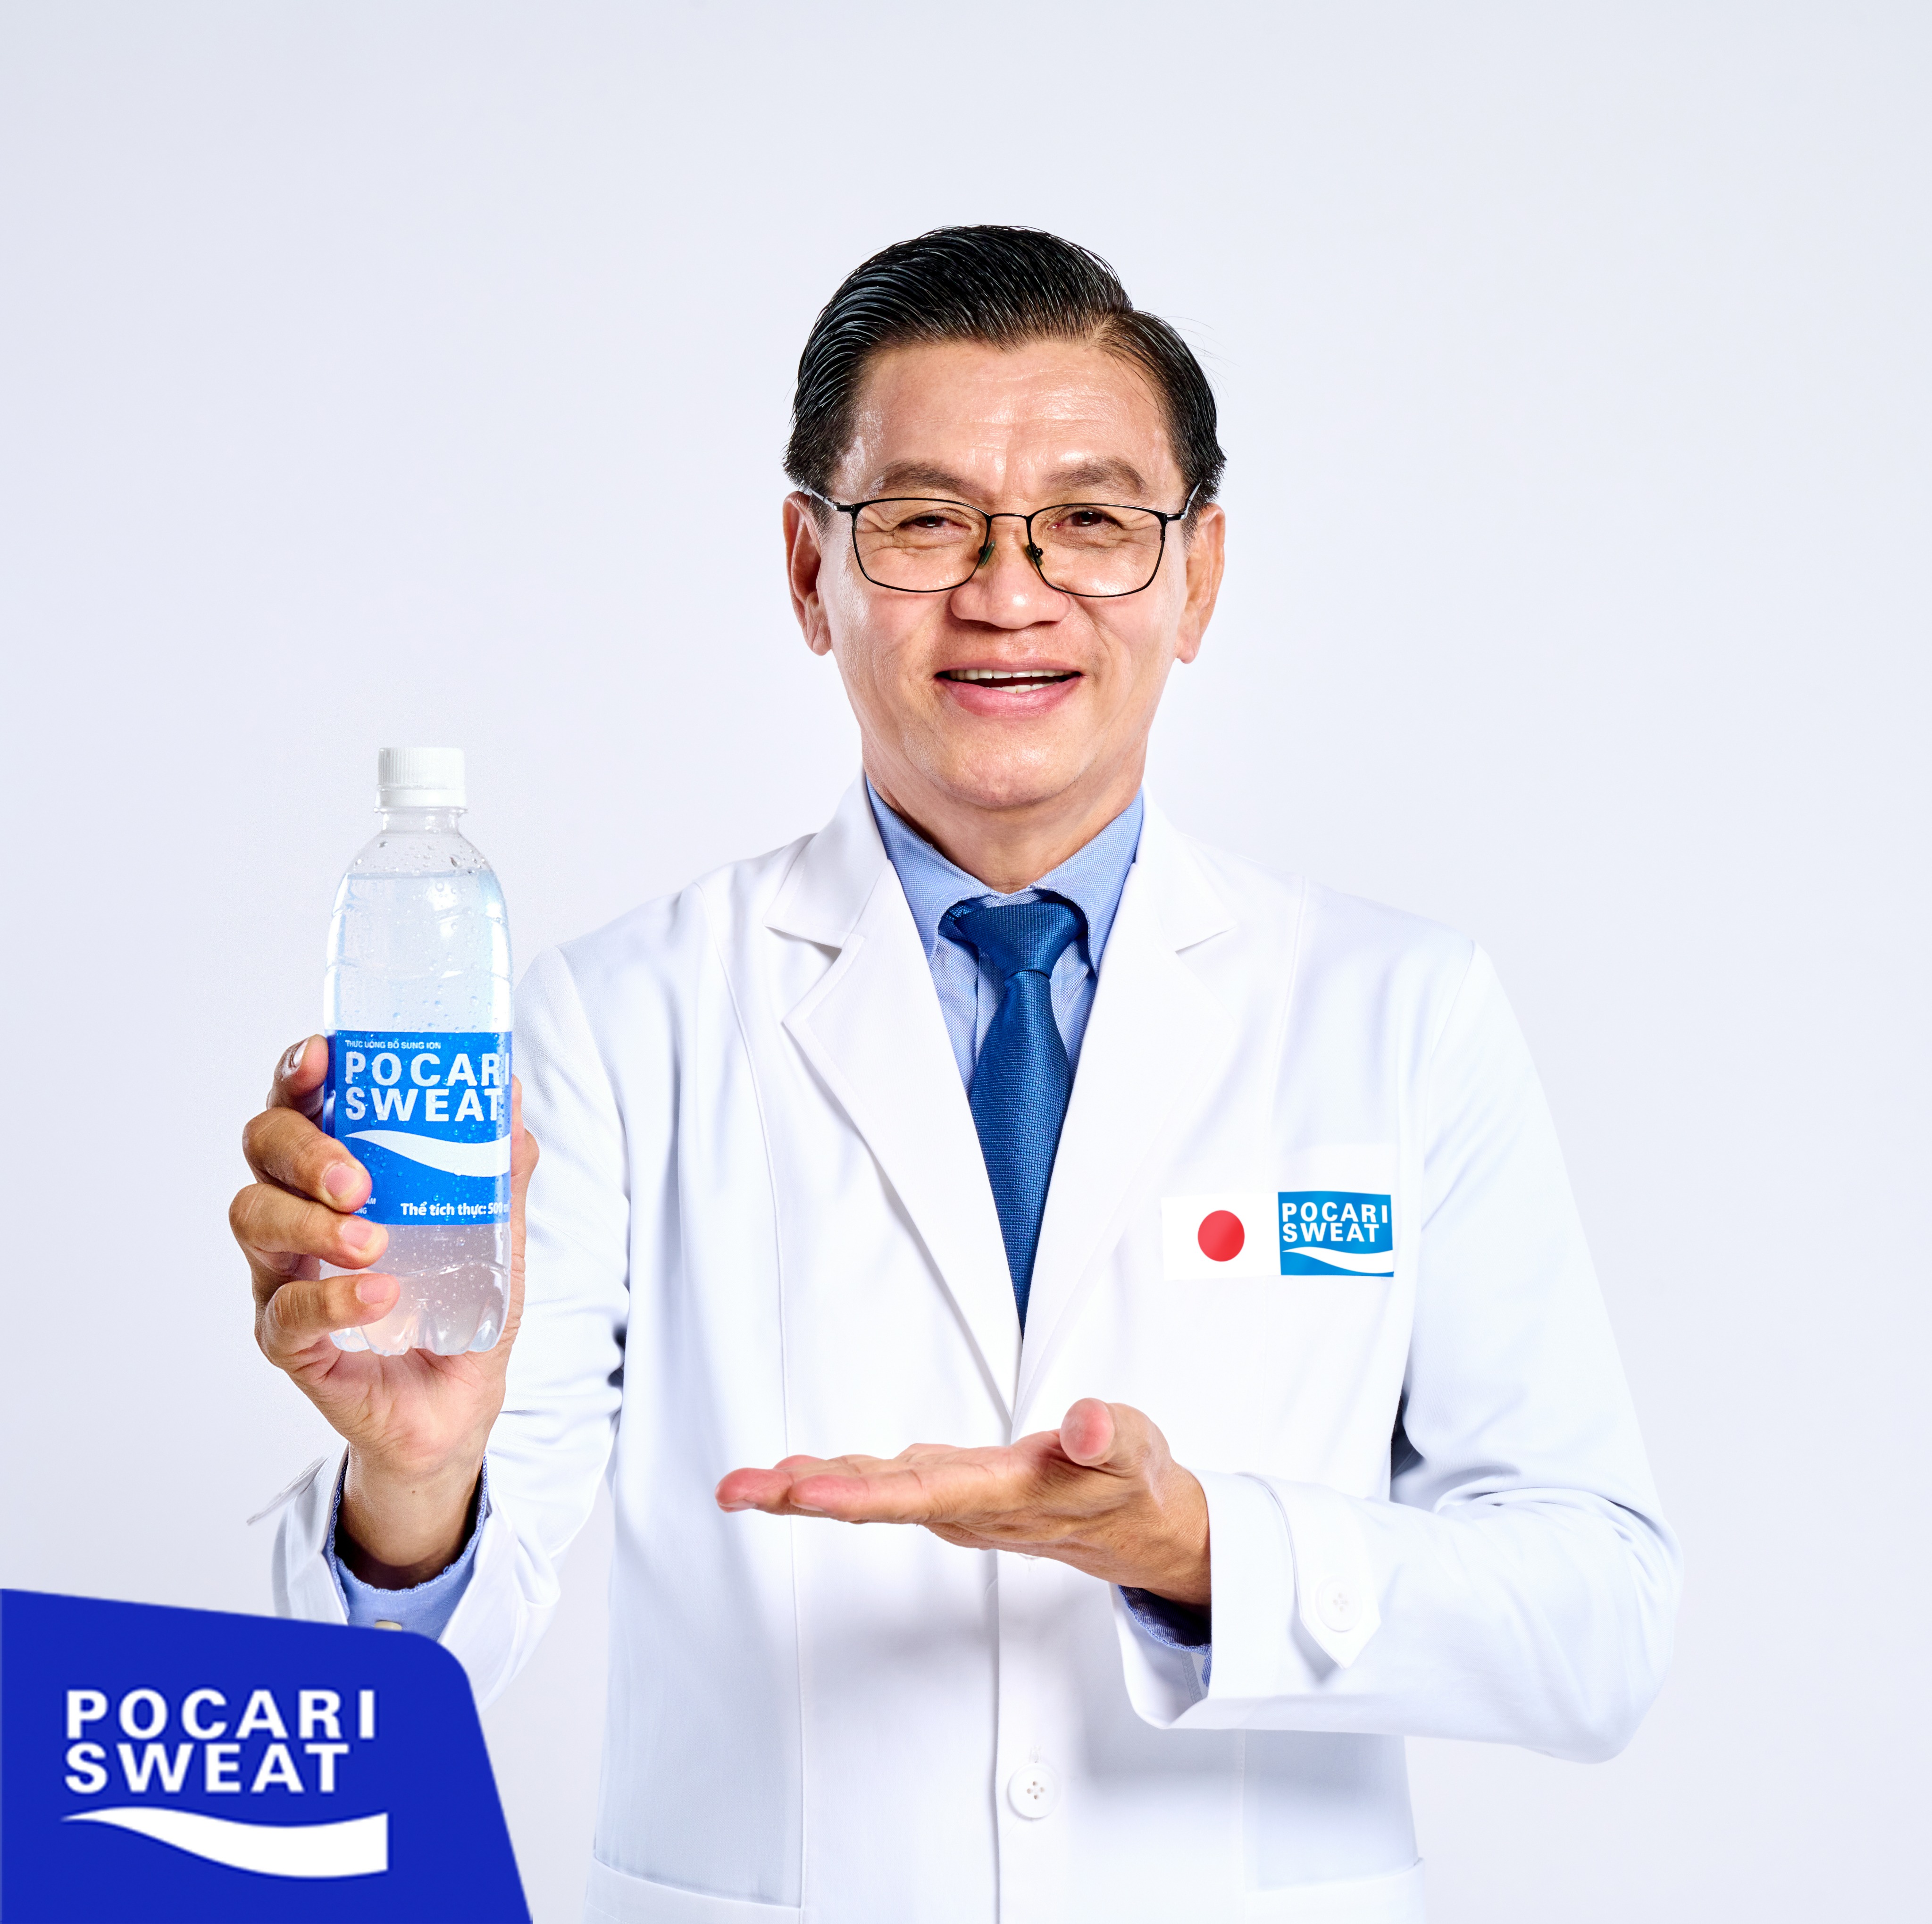  MISTAKES WHEN USING ION SUPPLY DRINK POCARI SWEAT